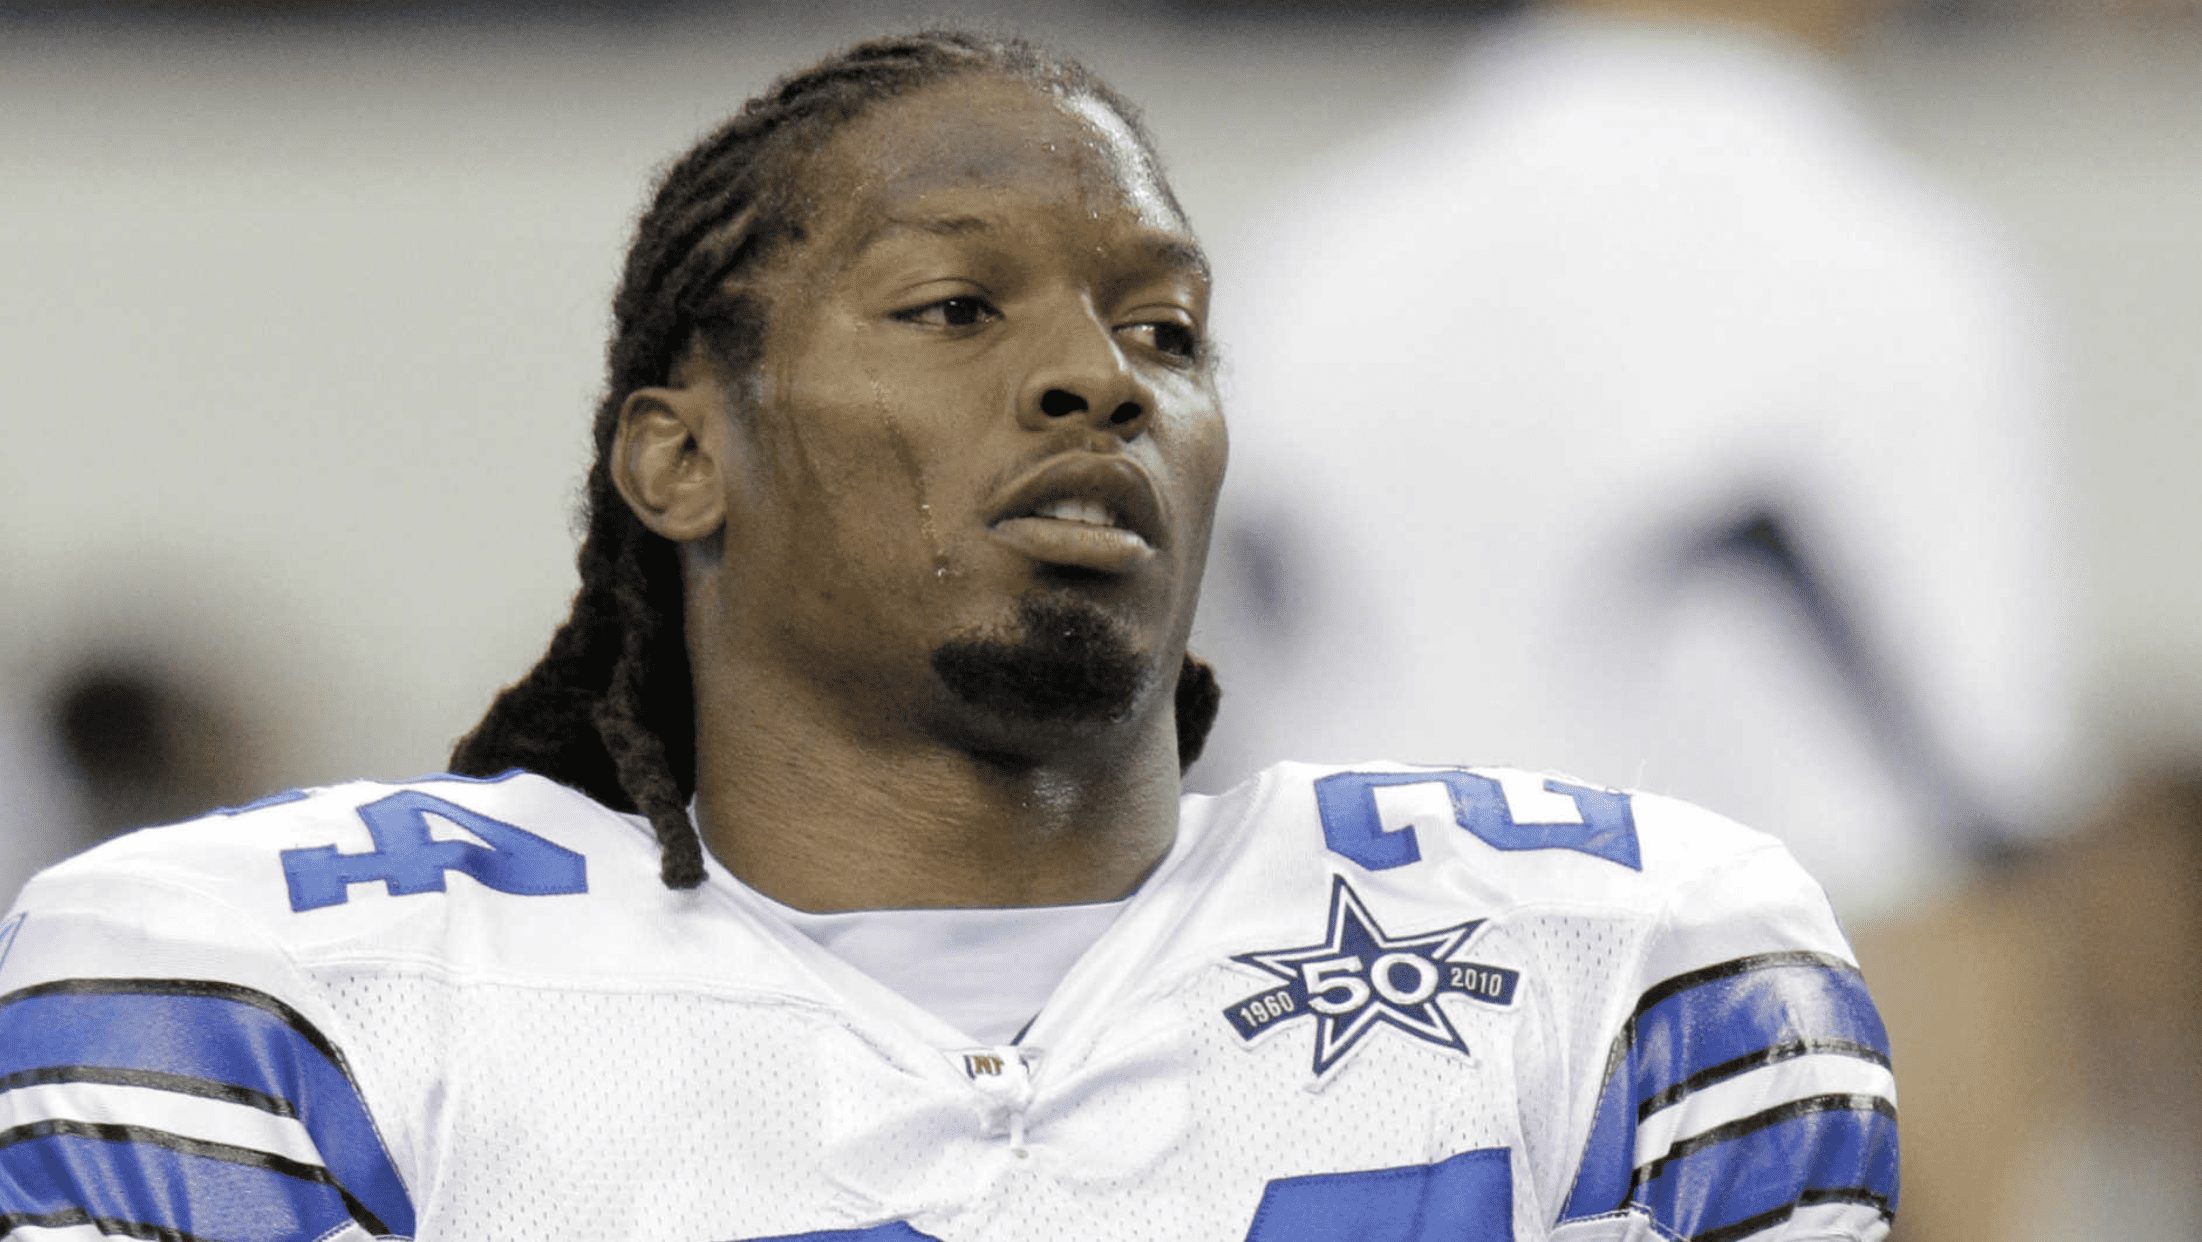 Apartment Staff Tried Contacting Marion Barber Several Times Before He Was Found